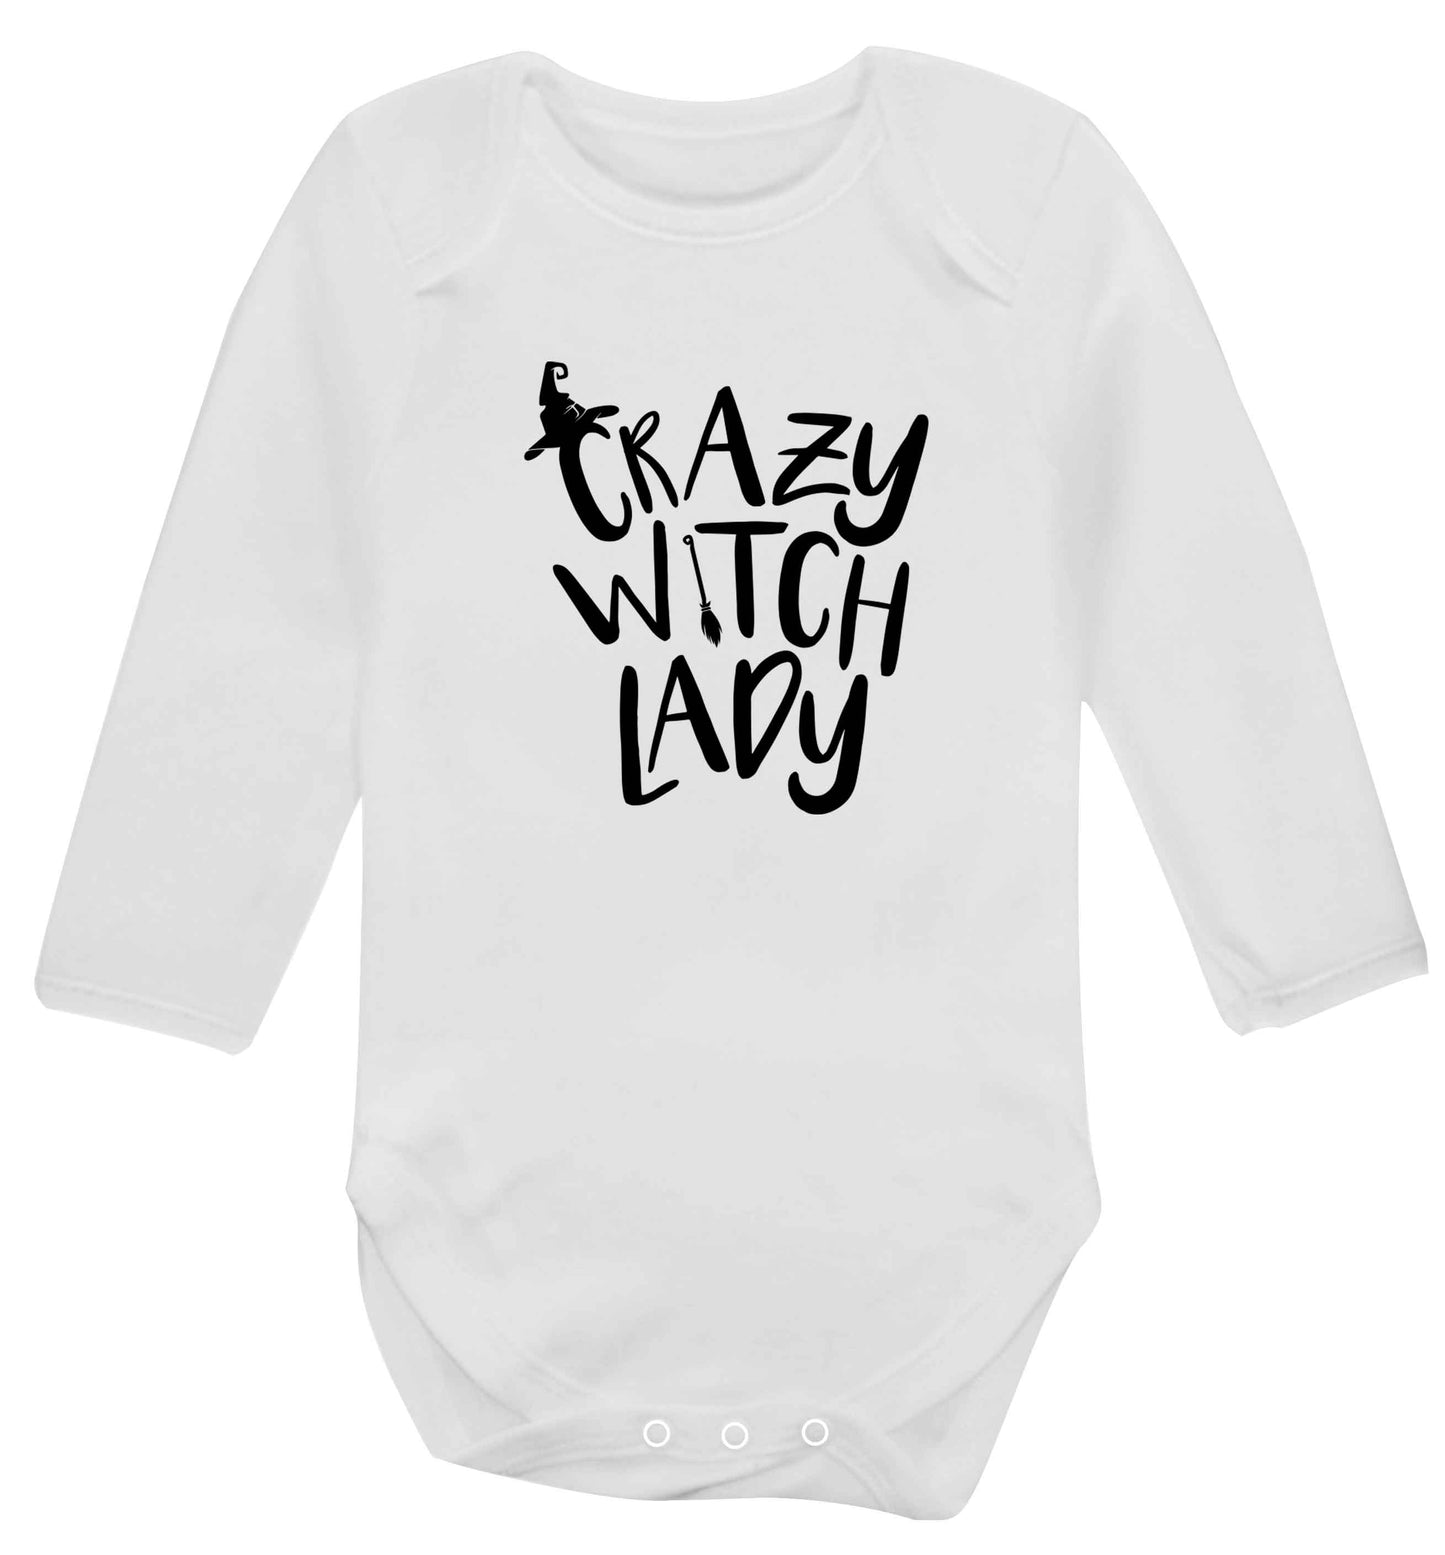 Crazy witch lady baby vest long sleeved white 6-12 months